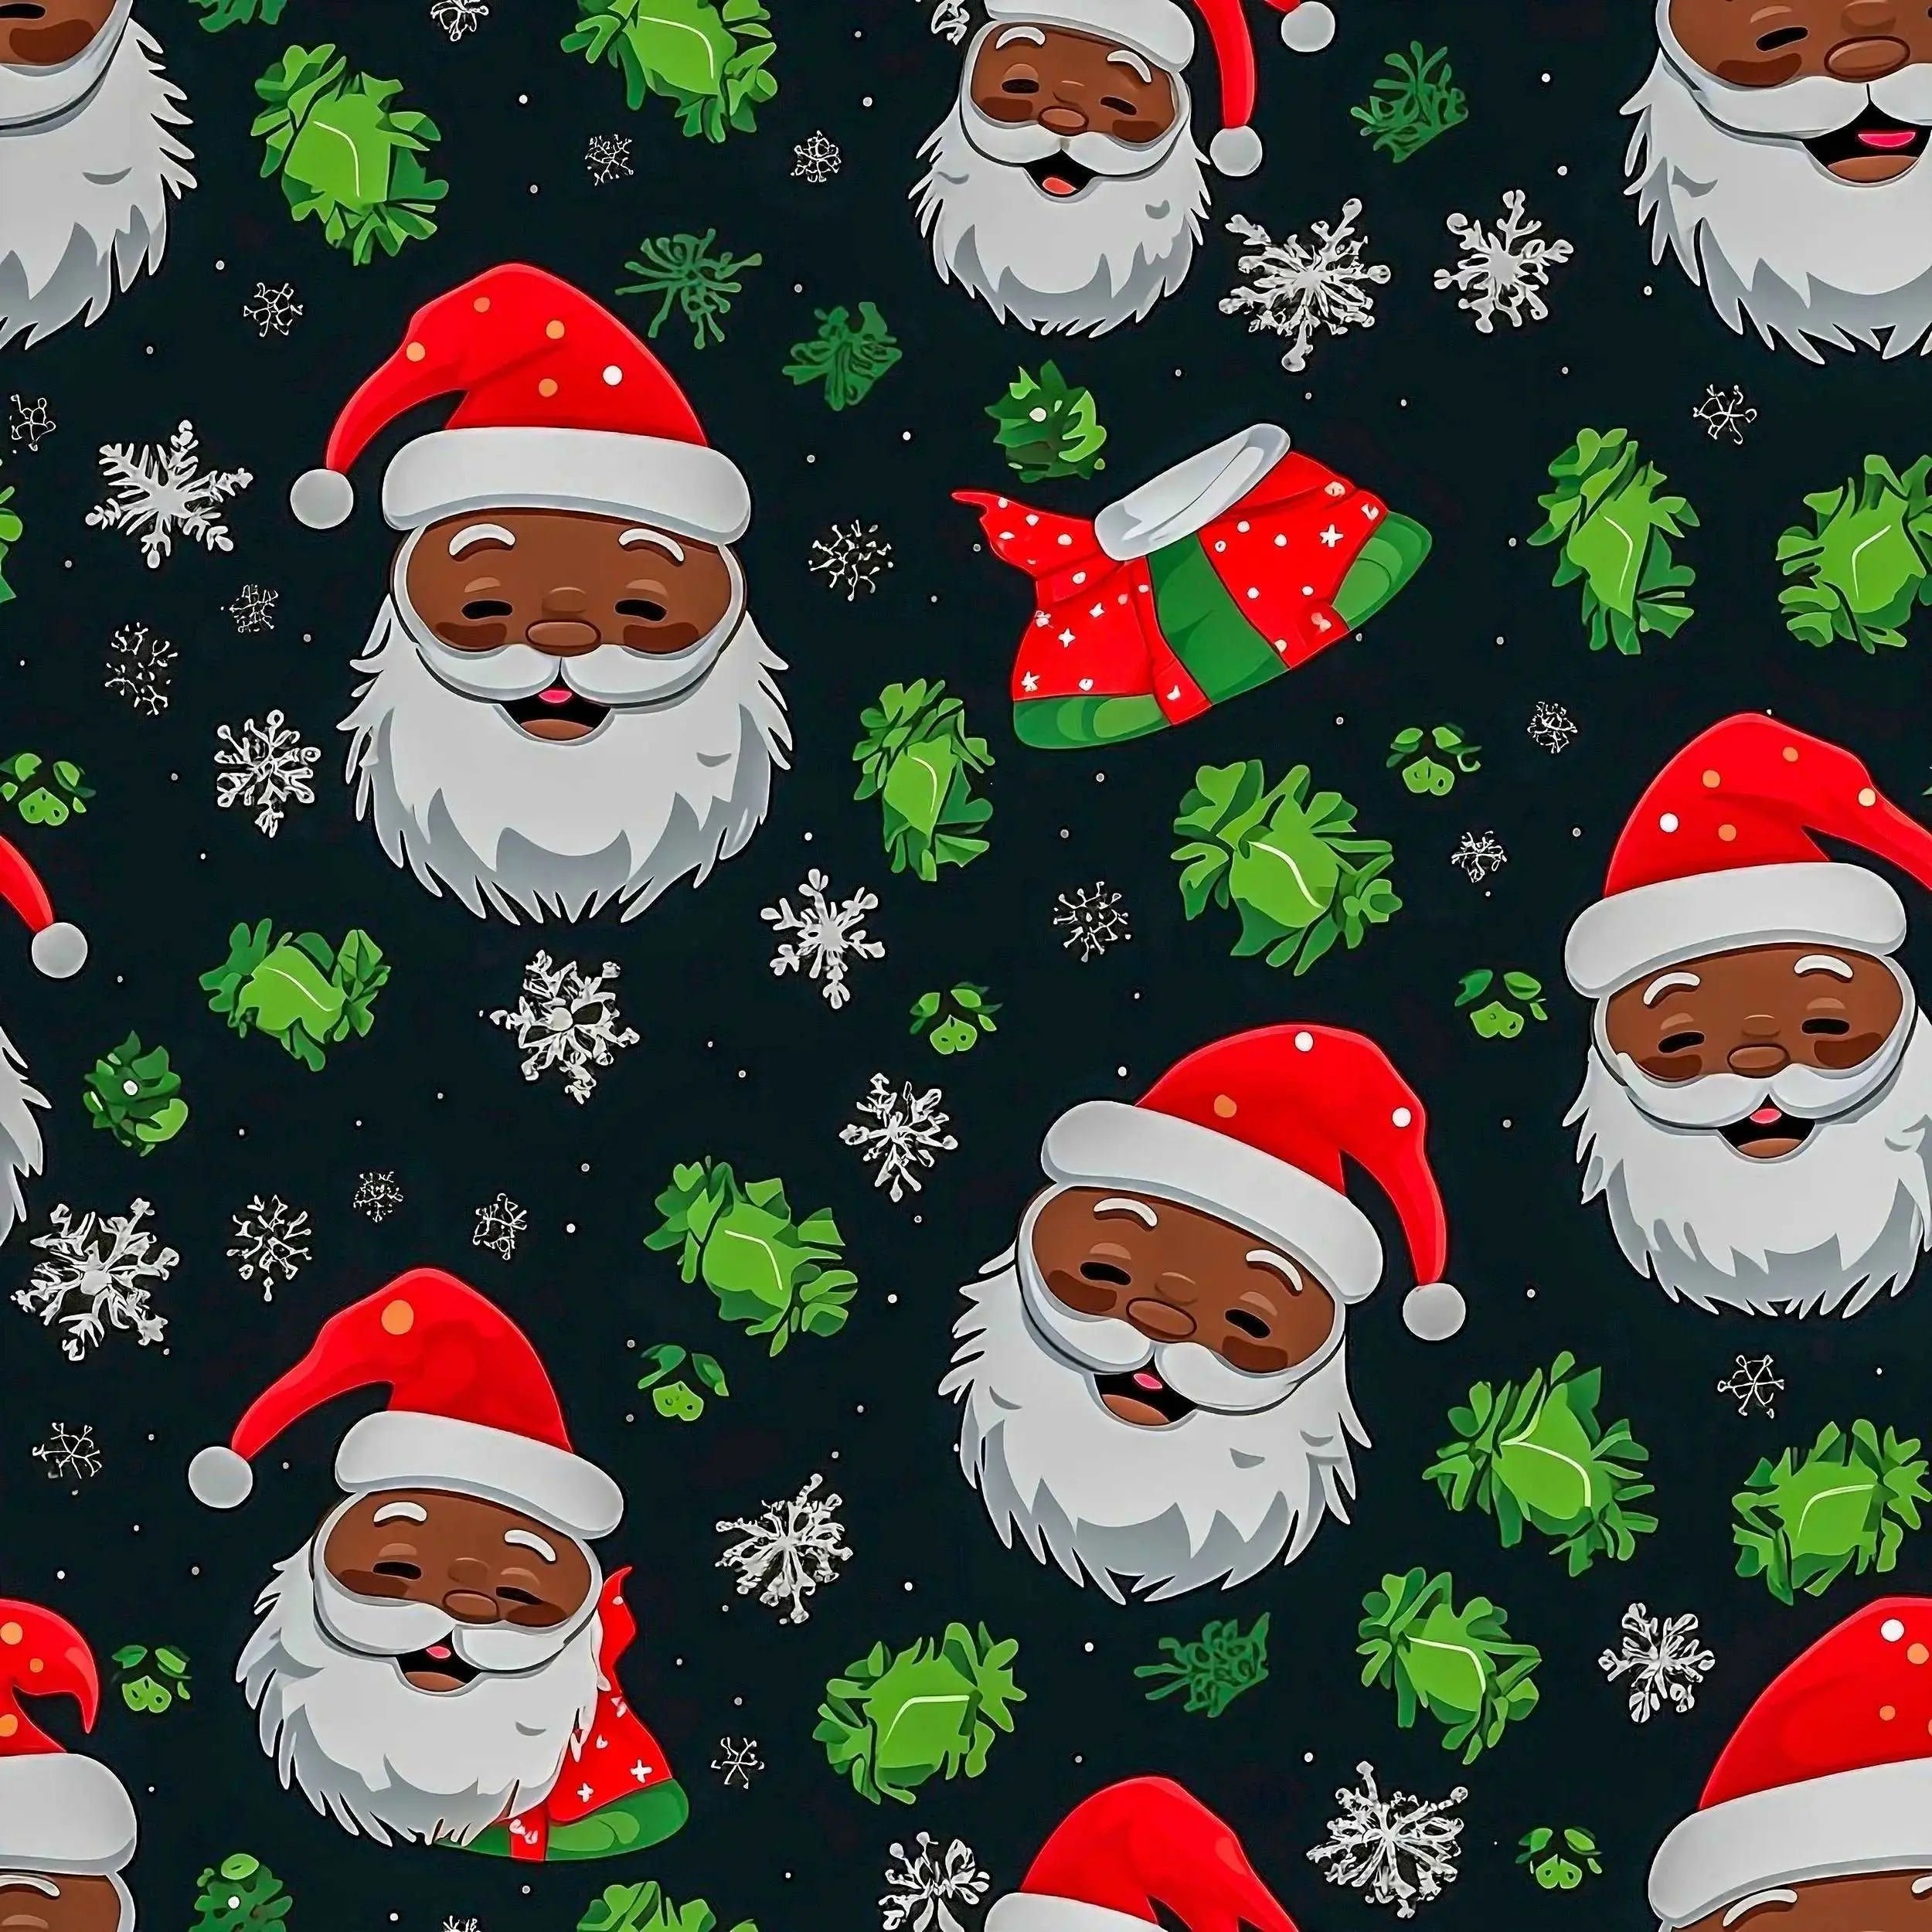 Black Santa Claus Wrapping Paper Rolls - The Curated Goose